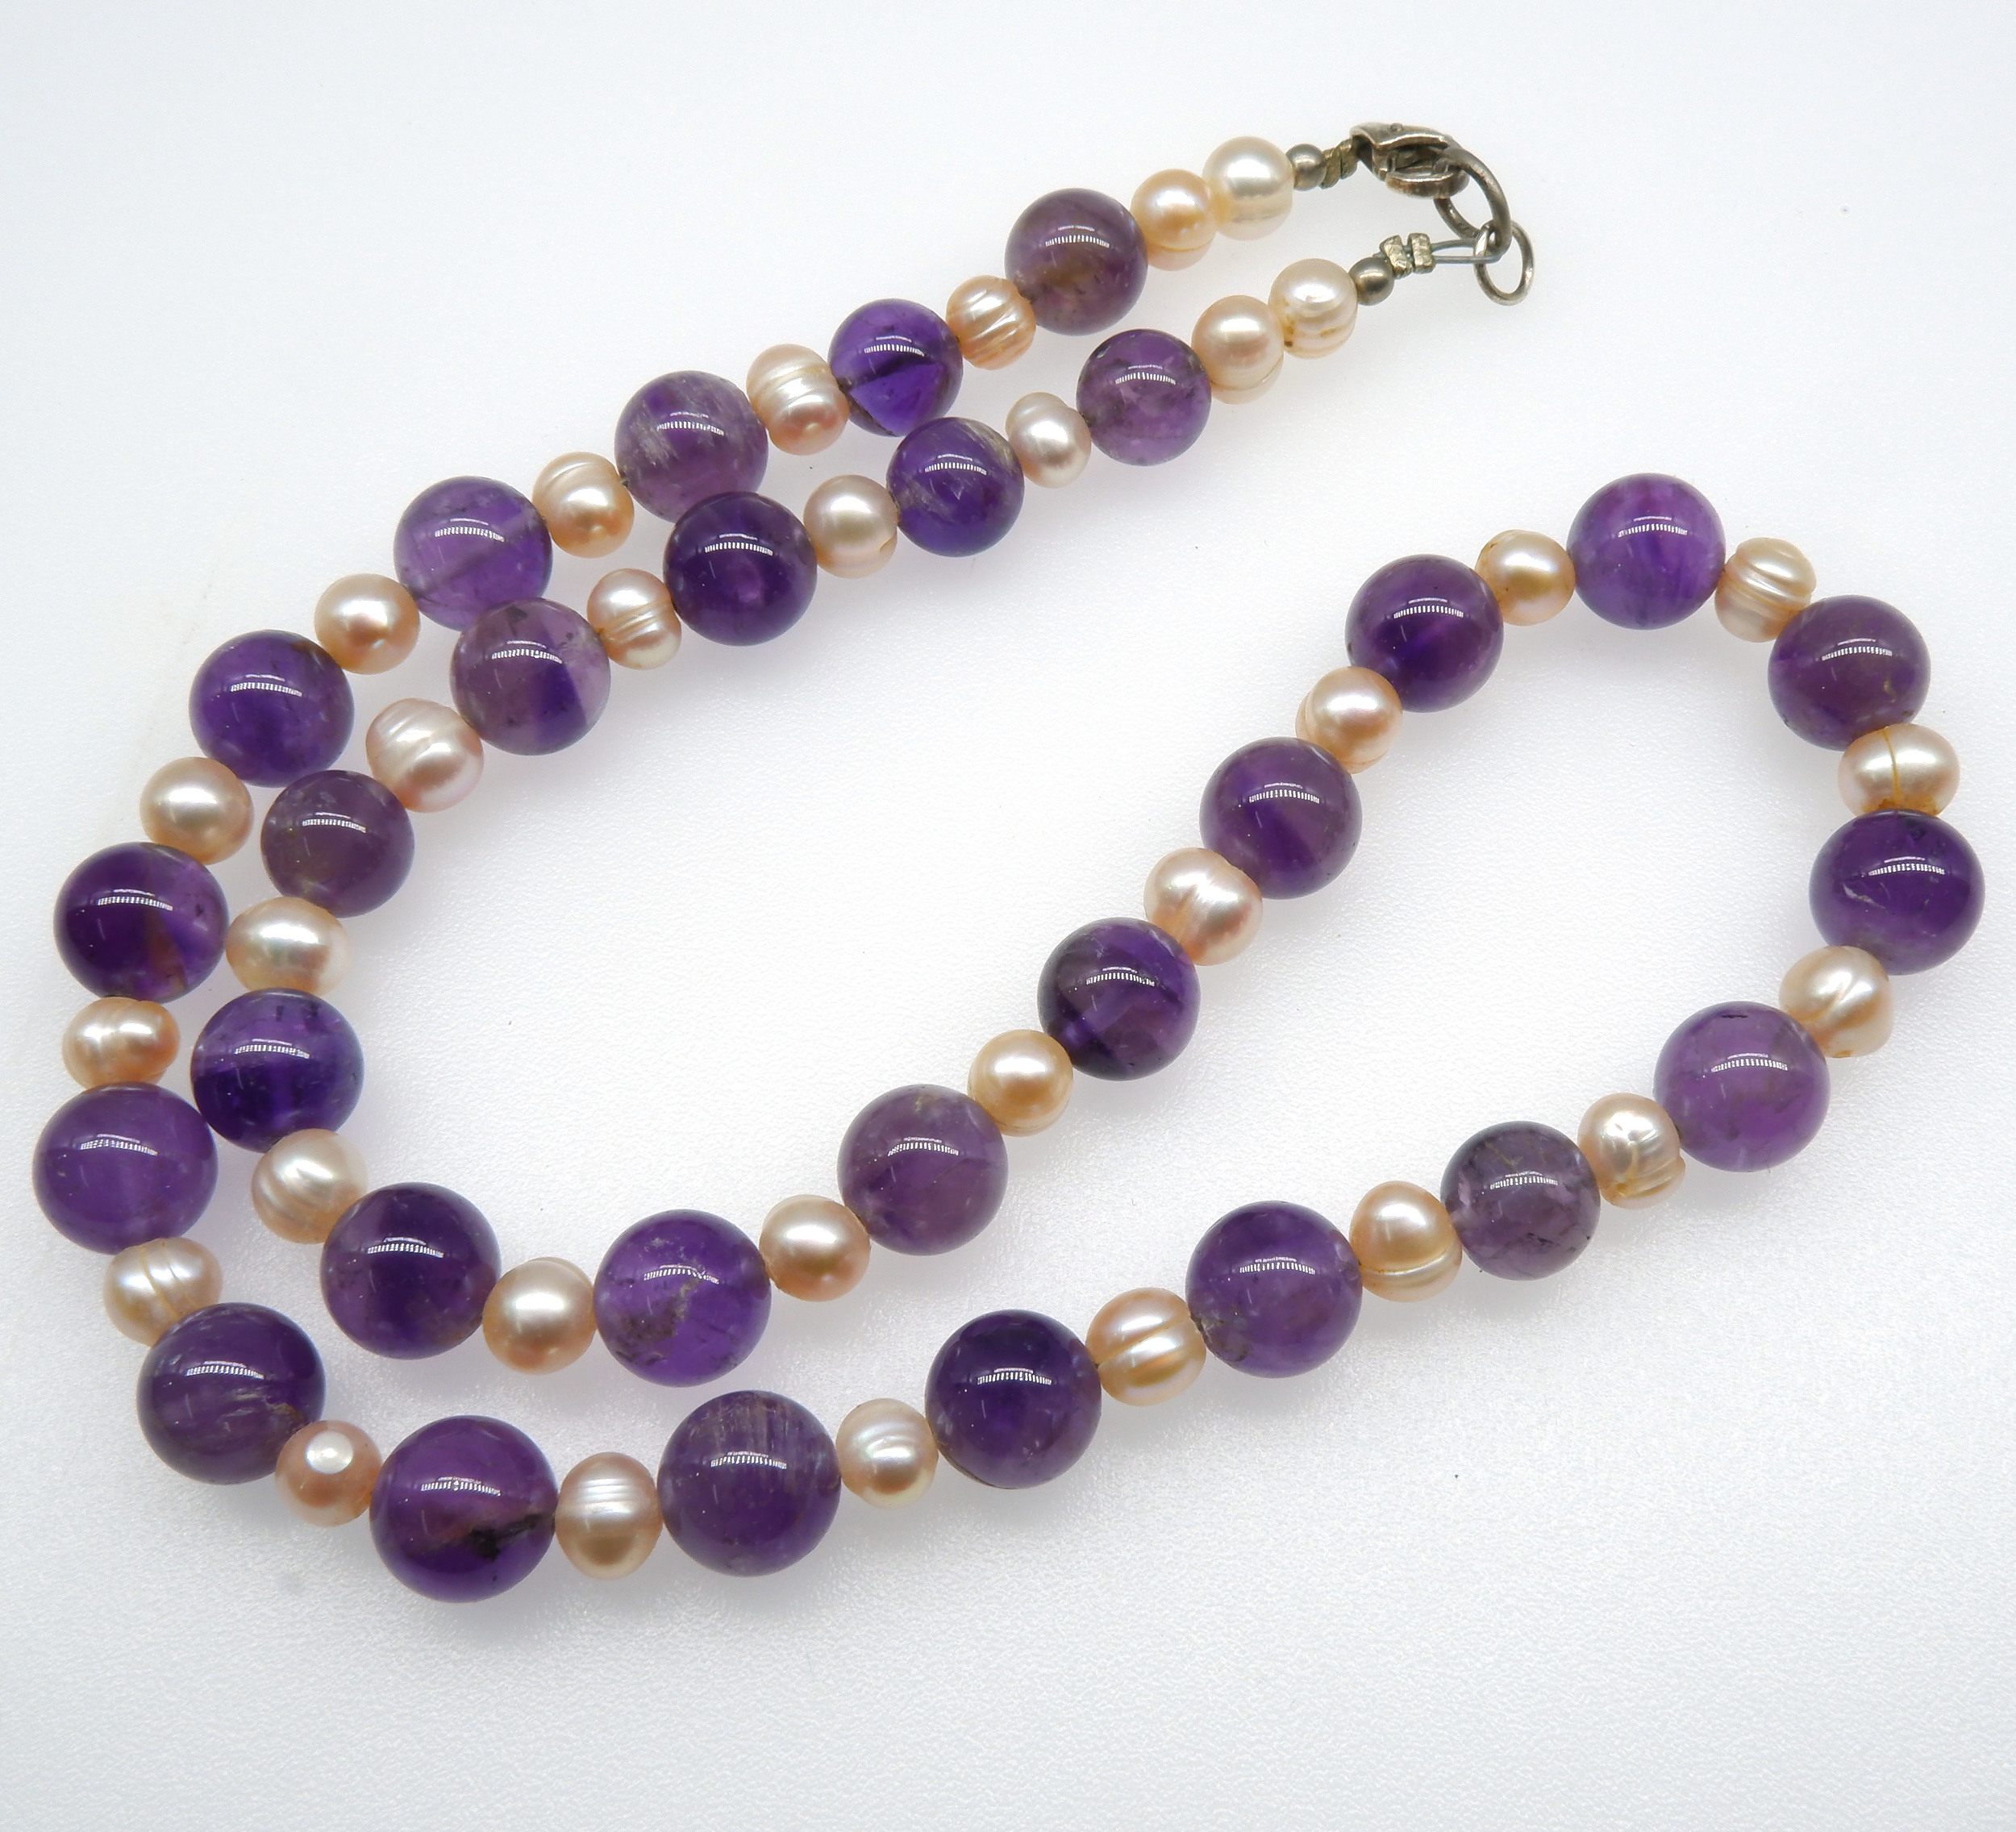 'Round Amethyst Beaded Necklace Alternating with Pale Pink Freshwater Pearls'